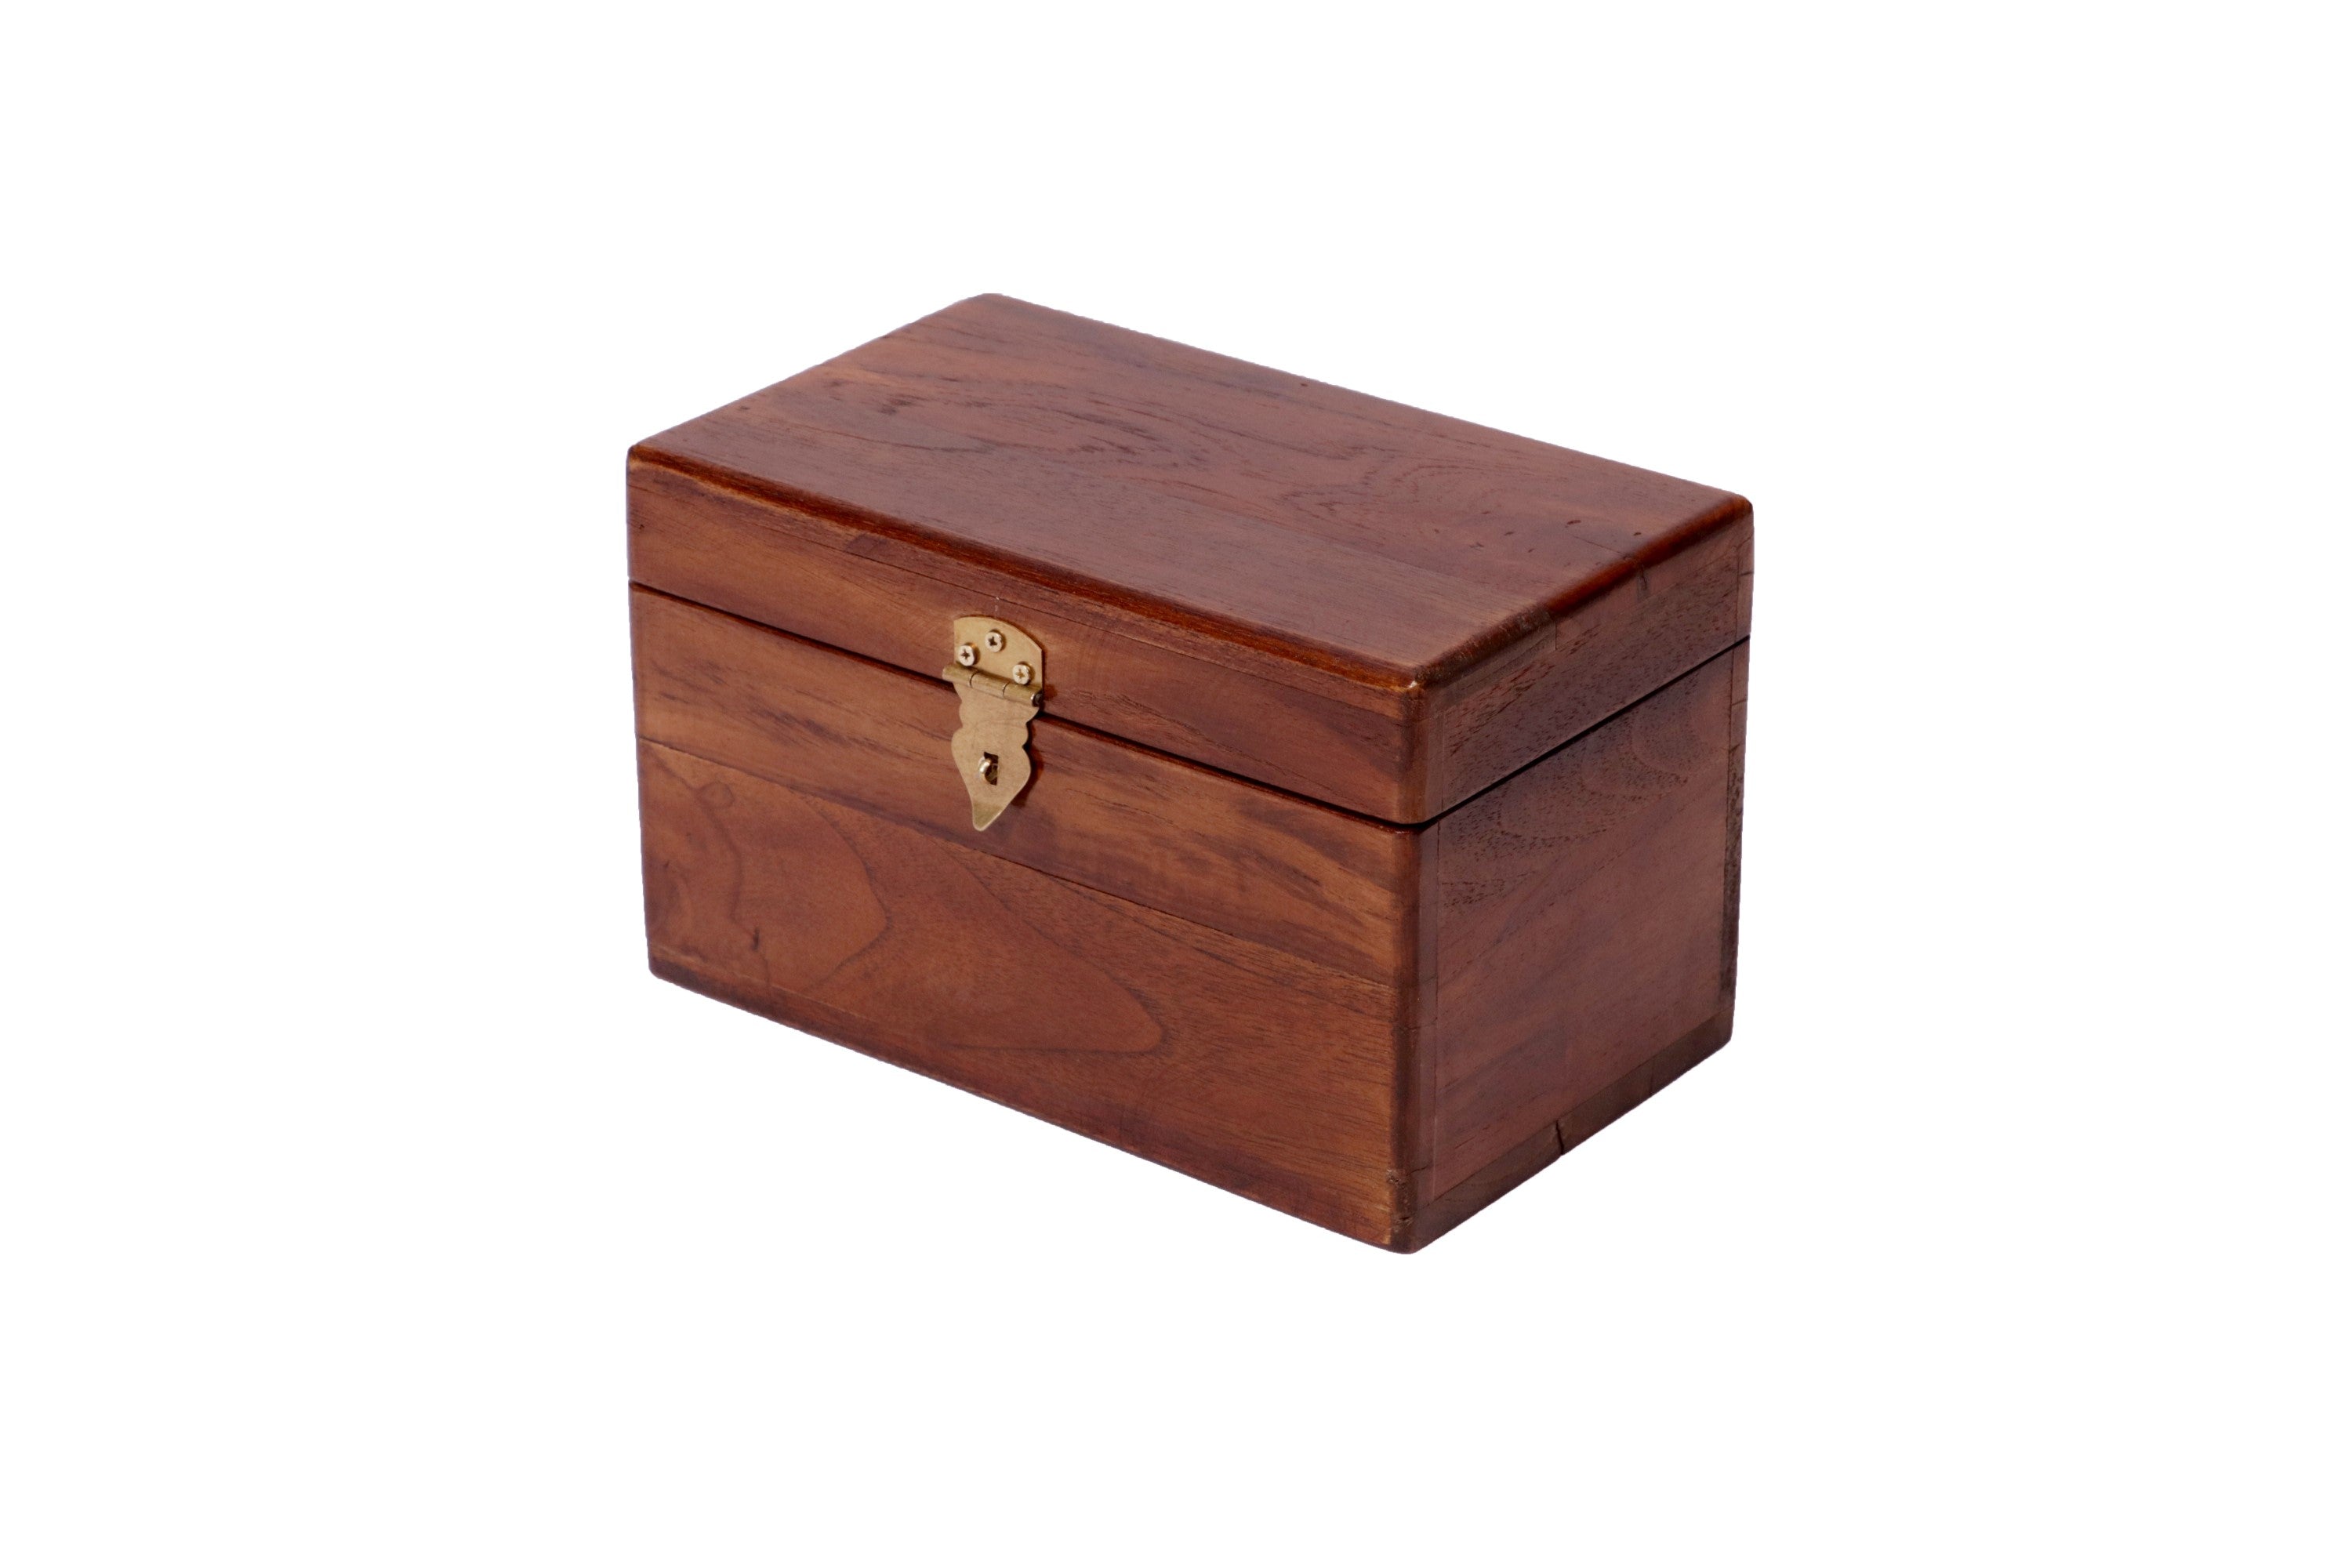 Wooden Simplistic Boxes Large (12 x 7 x 7 Inch) Wooden Box